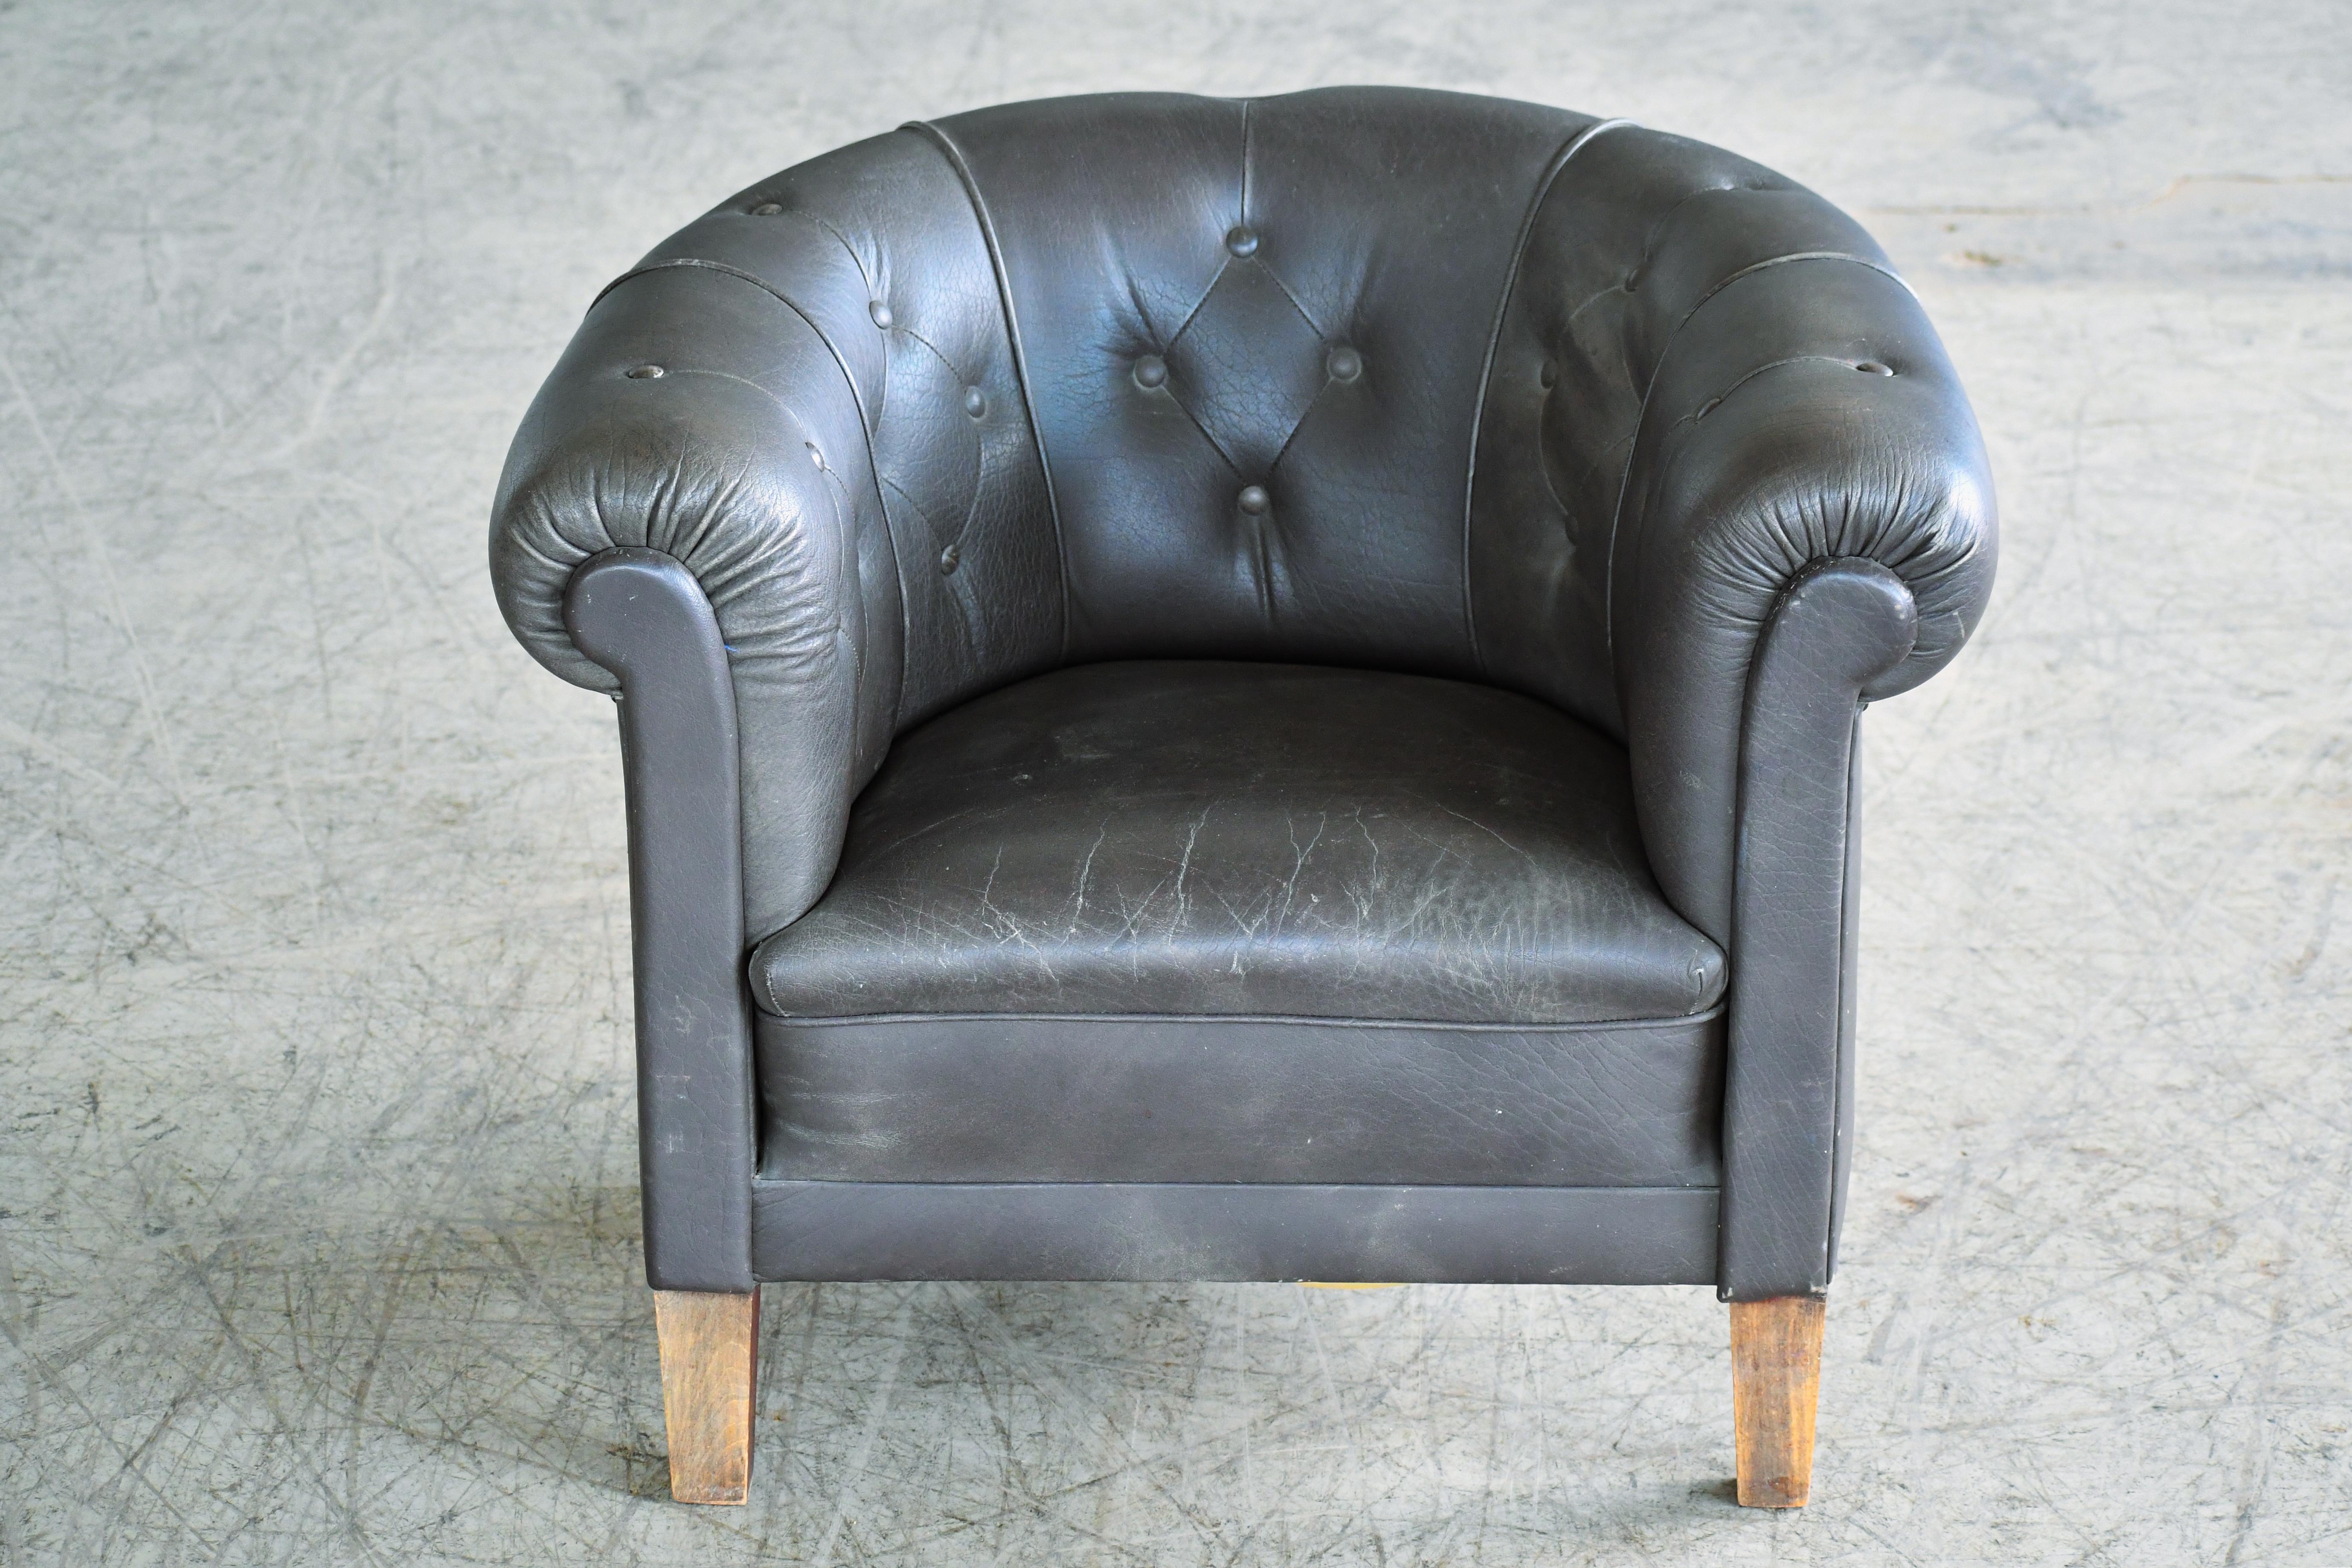 Very nice chesterfield style tub chair made in Denmark around the early 1950's in beechwood and a a charcoal/black leather that remains supple. No rips or tears. Leather decorated with brass tacks. Solid and sturdy with coil springs in both seat and